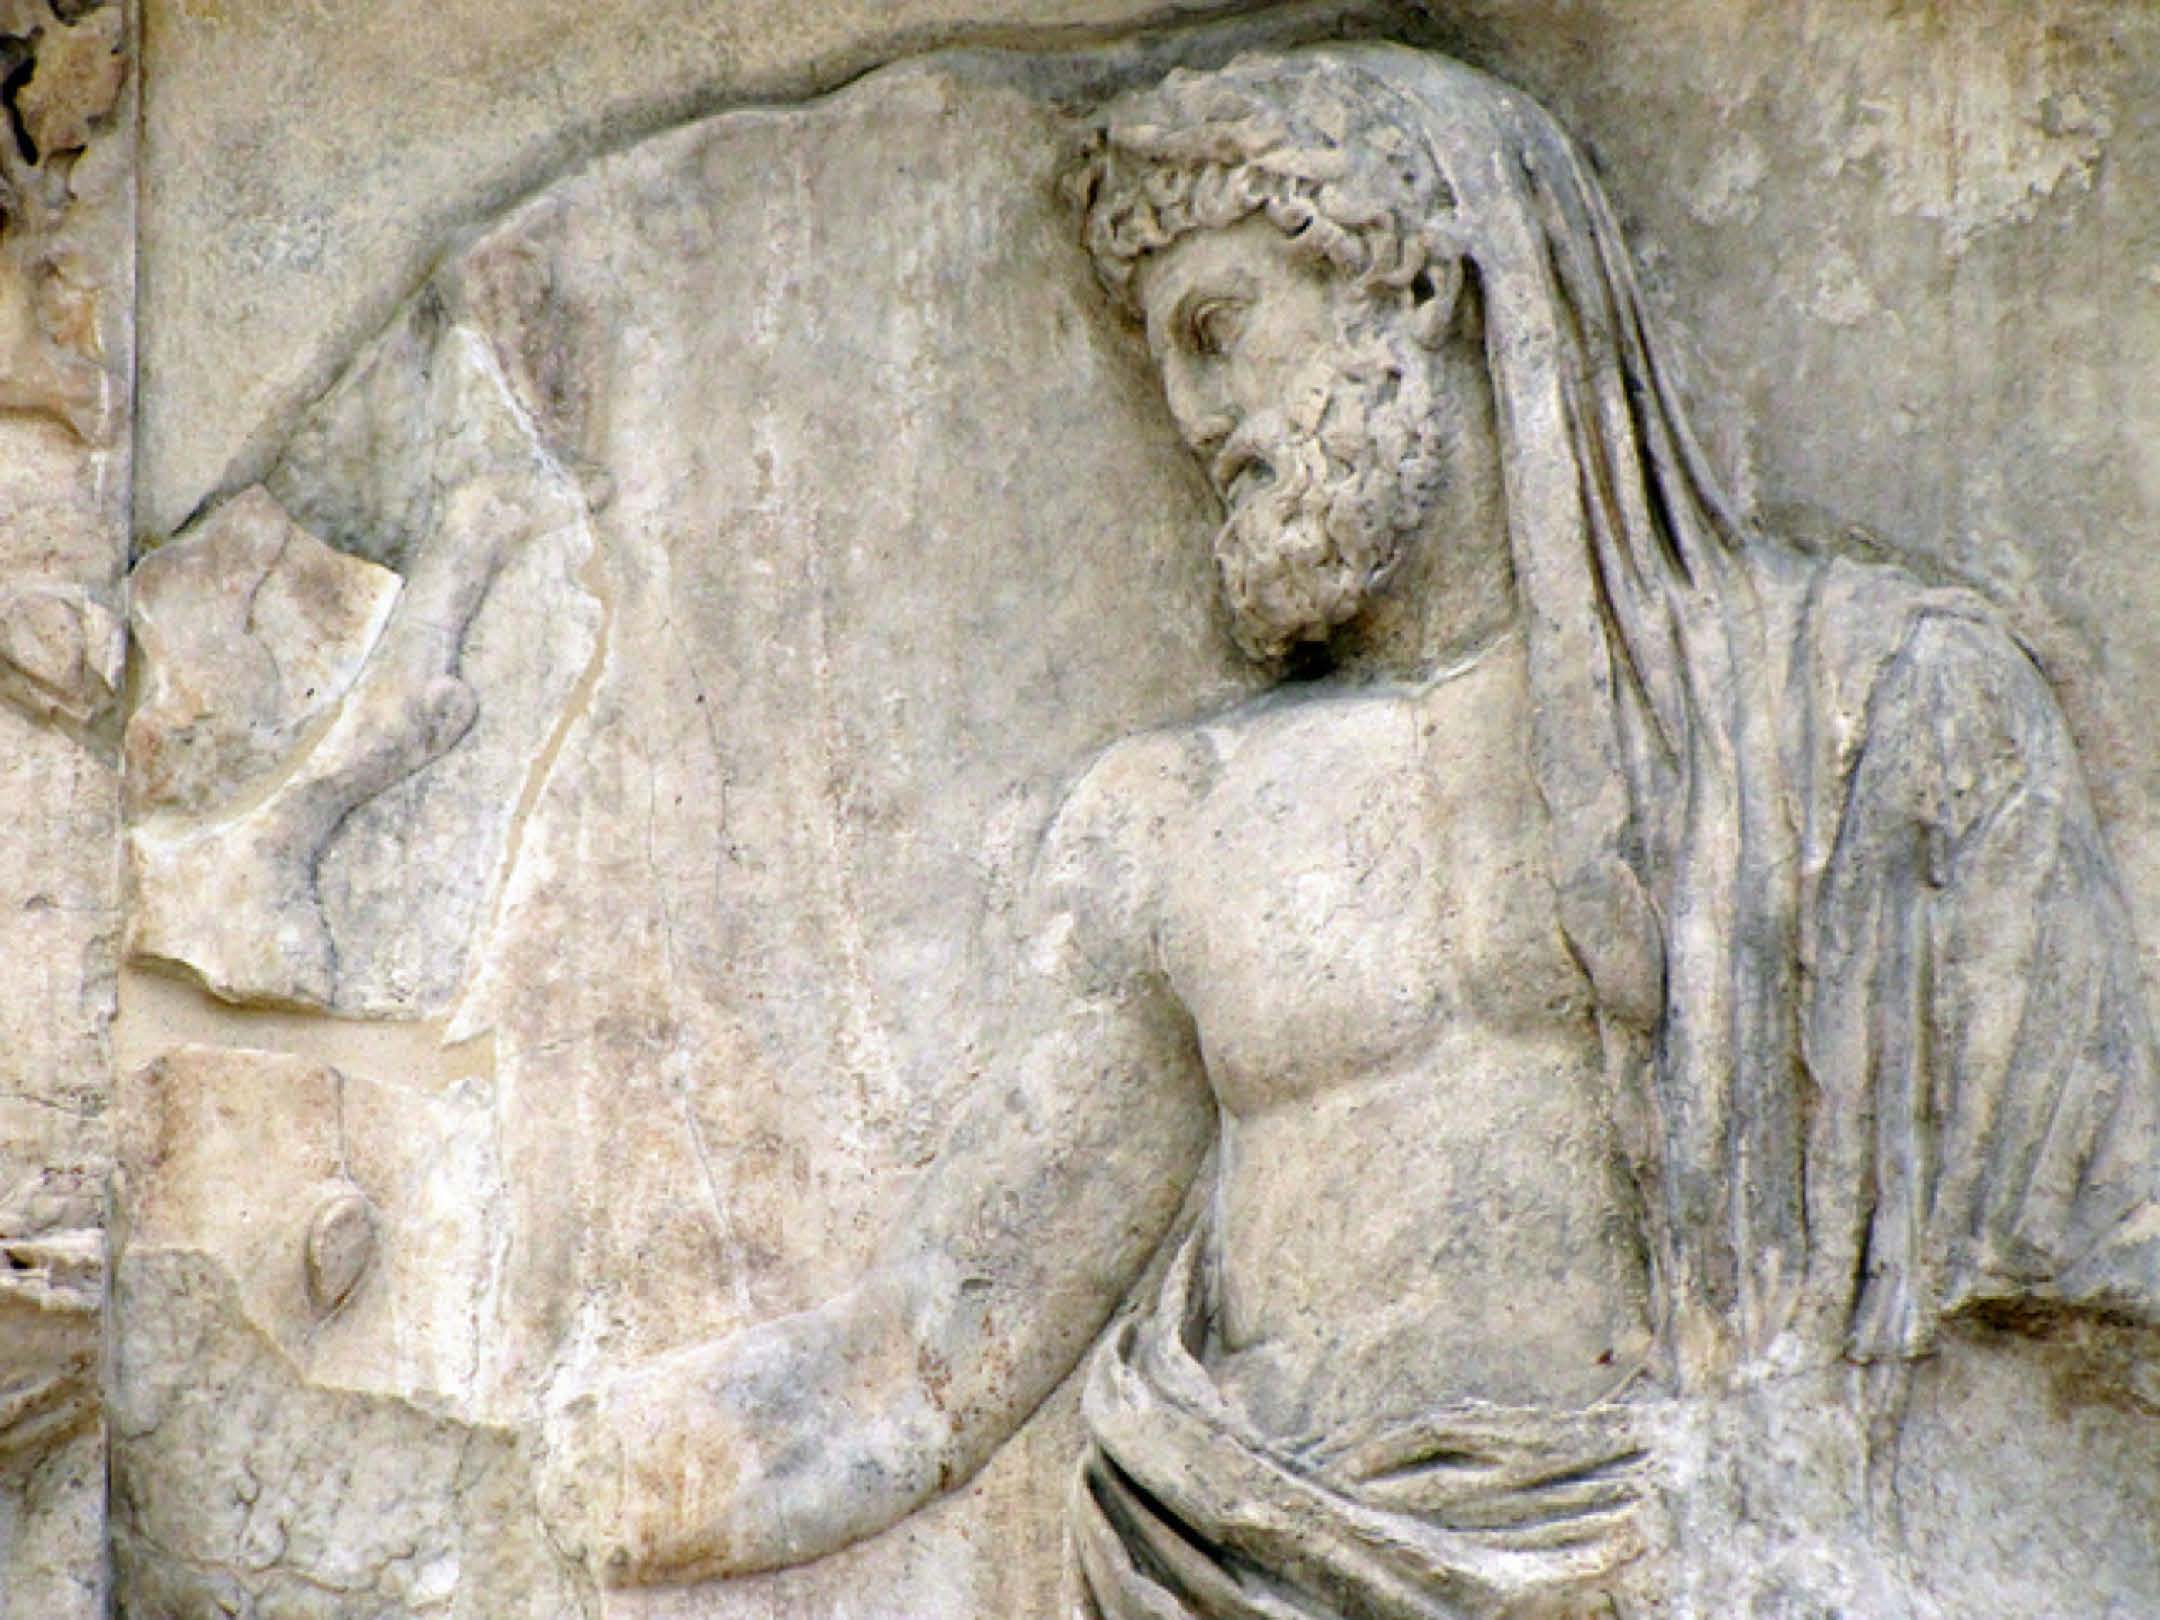 Detail of Aeneas or Numa from the Ara Pacis, 13 CE.